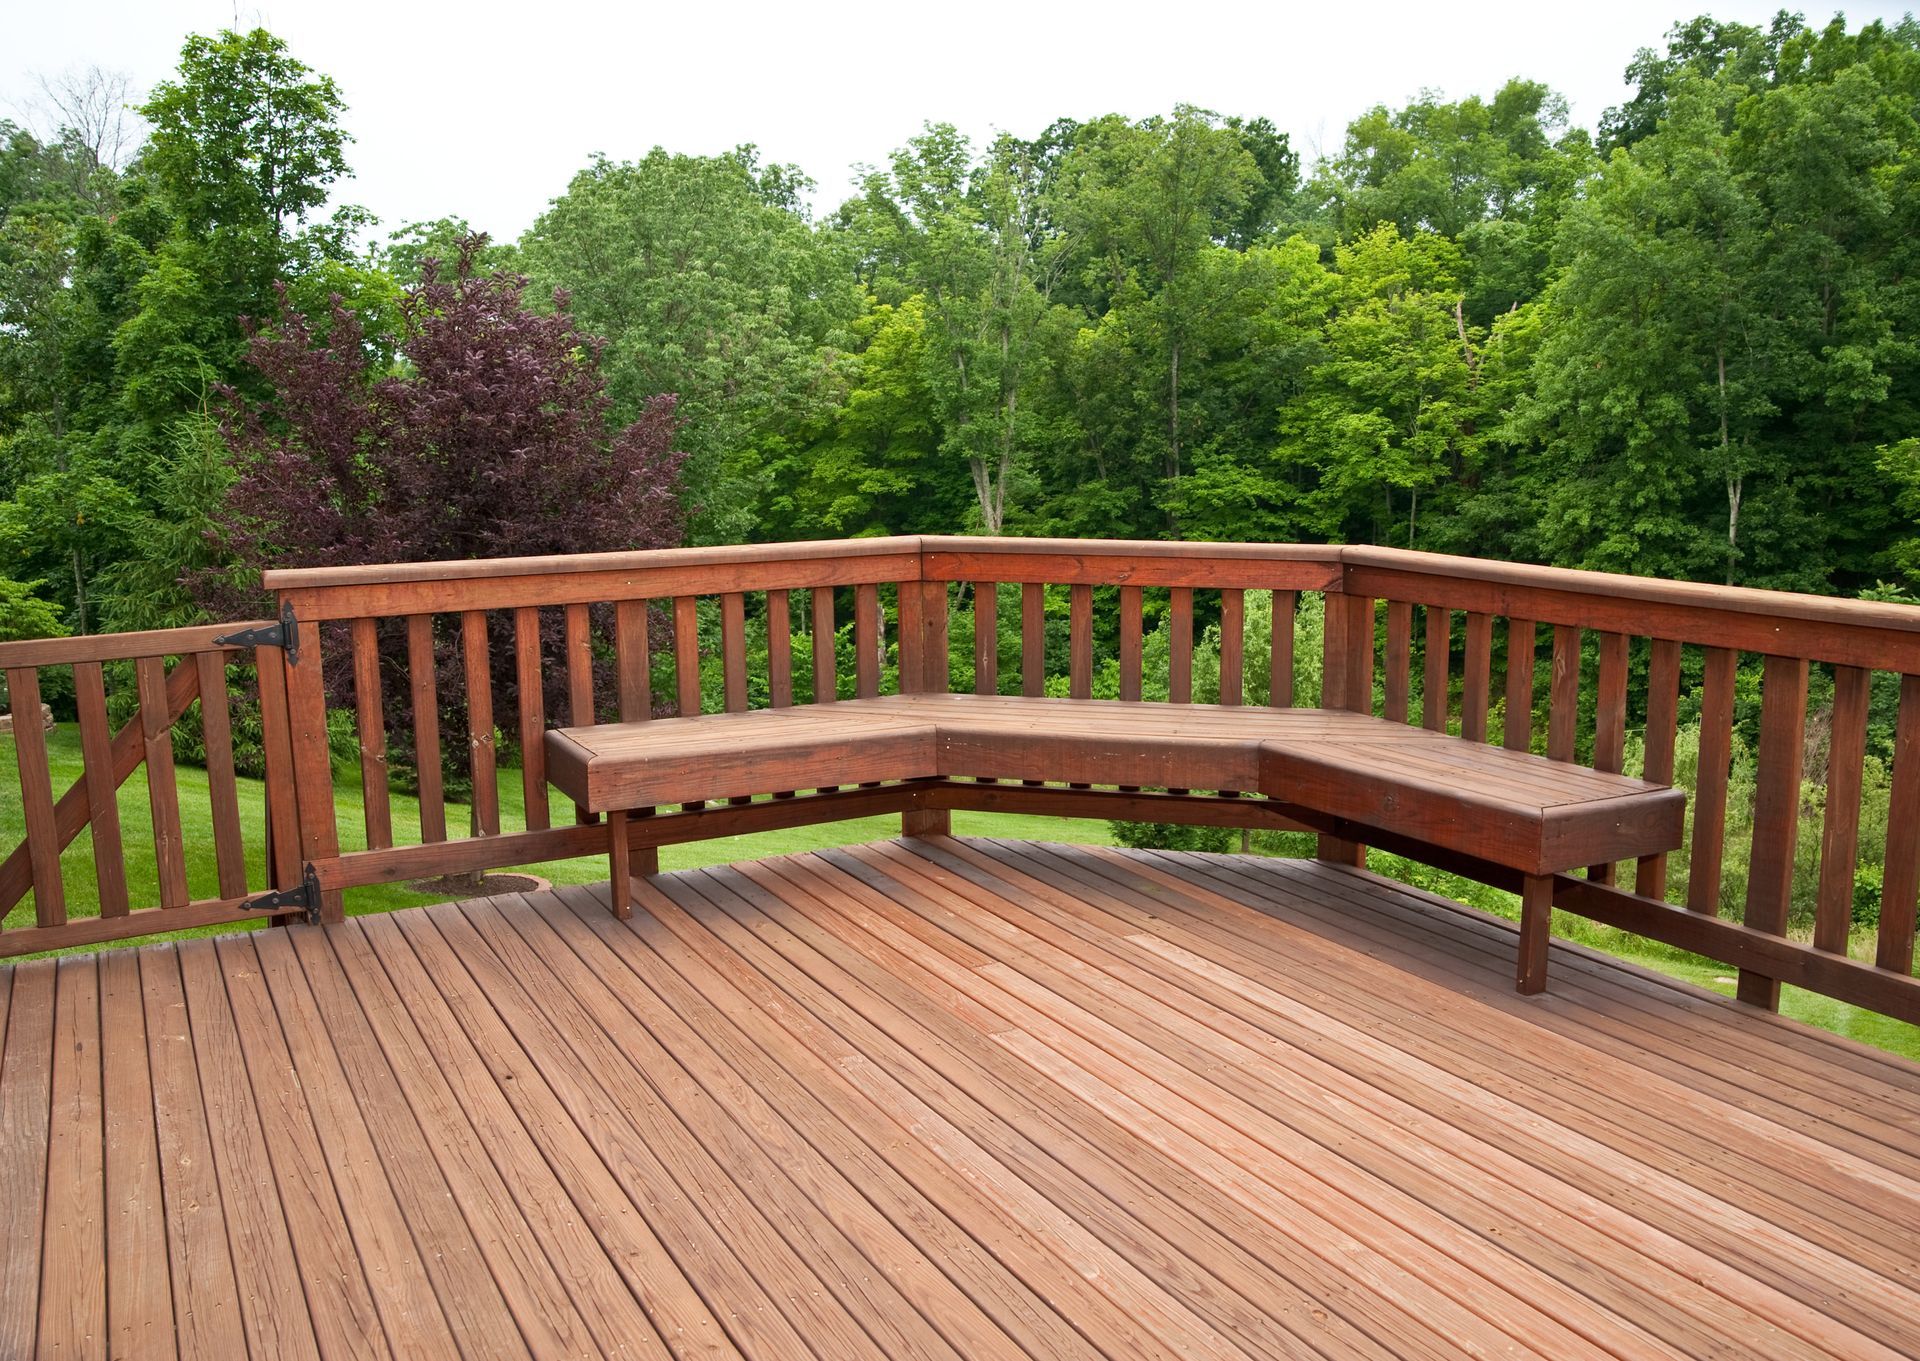 A wooden deck with a bench and trees in the background